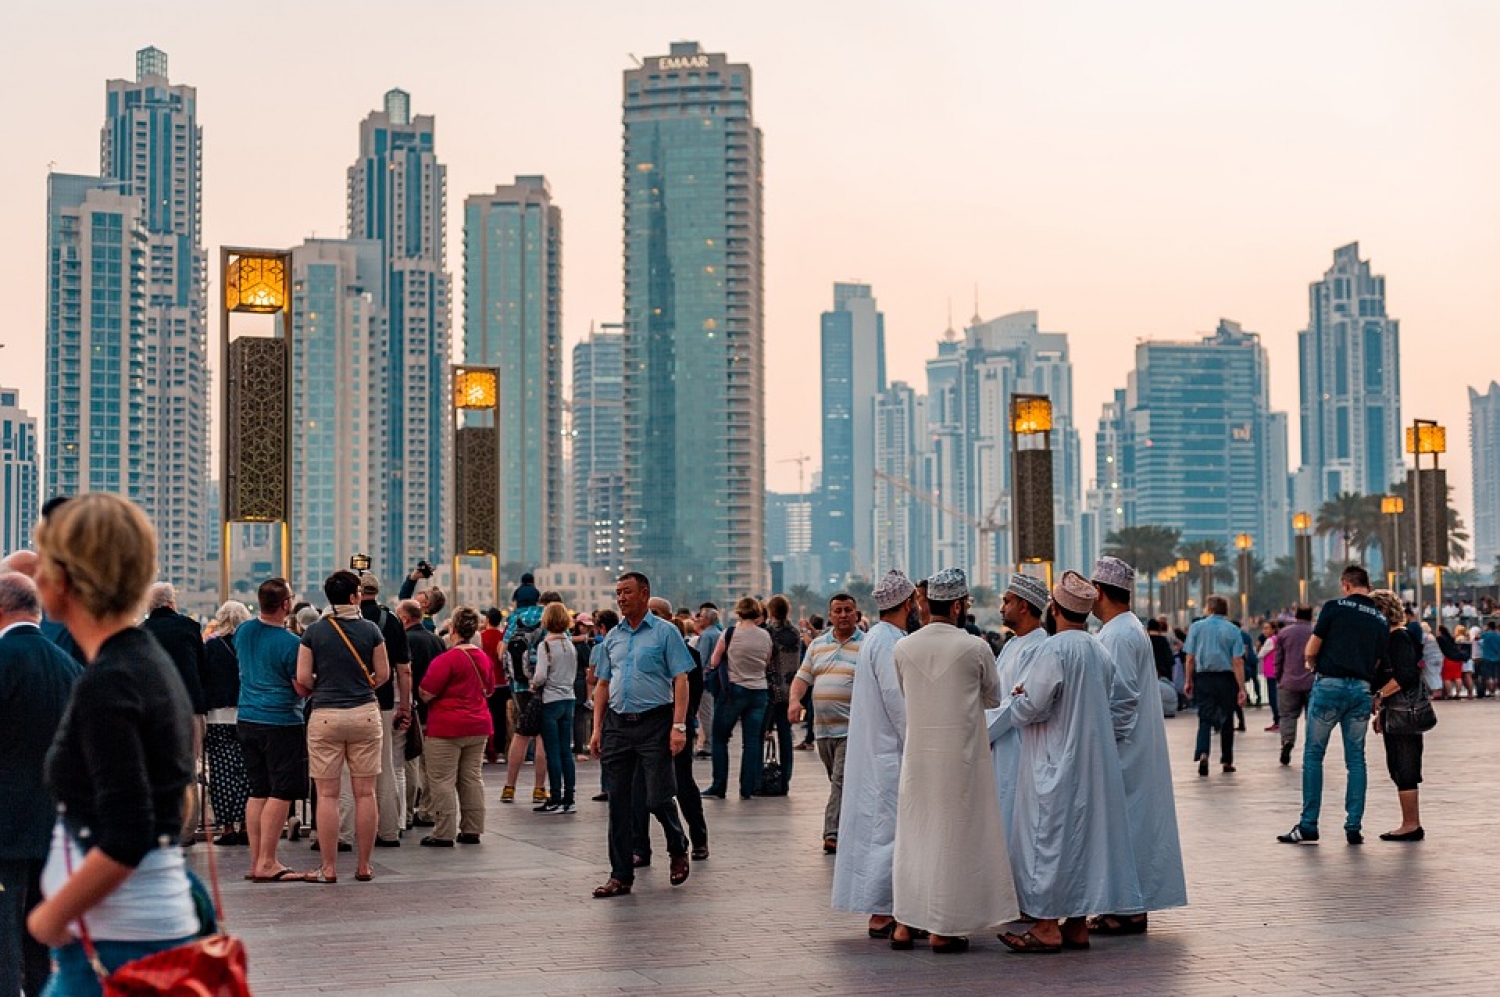 Dubai set to host the largest in person tourism event in the world